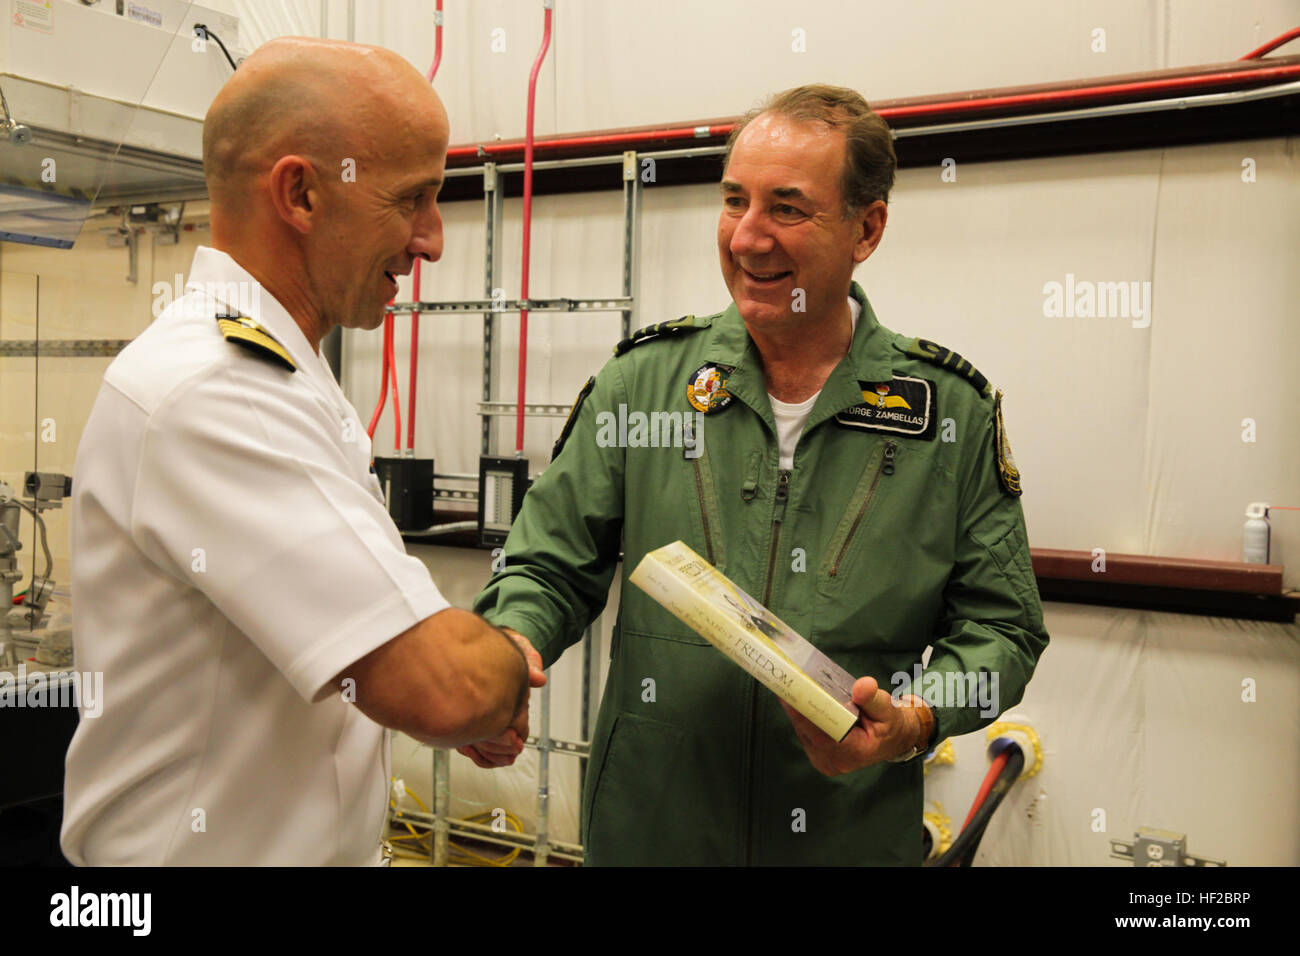 The First Sea Lord and Chief of Naval Staff of the British Royal Navy, Adm. Sir George Zambellas, right, receives a gift from a U.S. Navy captain during a visit at Naval Surface Warfare Center at Dahlgren, Va., July 29, 2014. Zambellas is taking part in the Commandant of the Marine Corps' Counterpart Program, which invites foreign military leaders to visit the United States and interact with U.S. military leaders. (U.S. Marine Corps photo by Cpl. Michael C. Guinto/Released) First Sea Lord Counterpart Visit 140729-M-LI307-457 Stock Photo